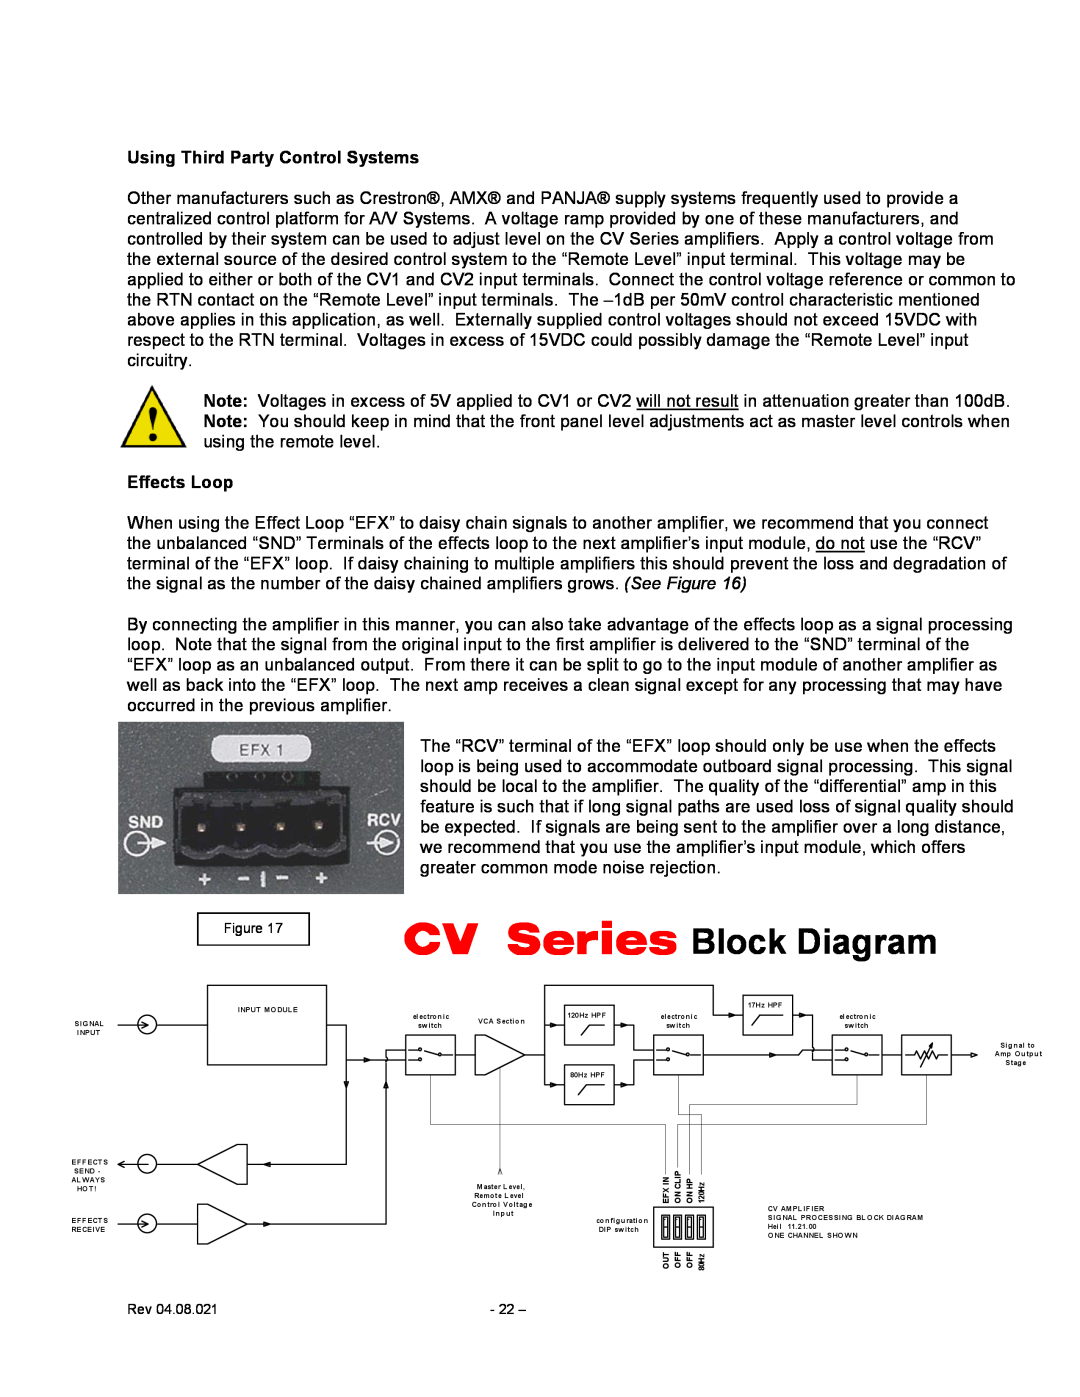 Carver user manual CV Series Block Diagram, Using Third Party Control Systems, Effects Loop 